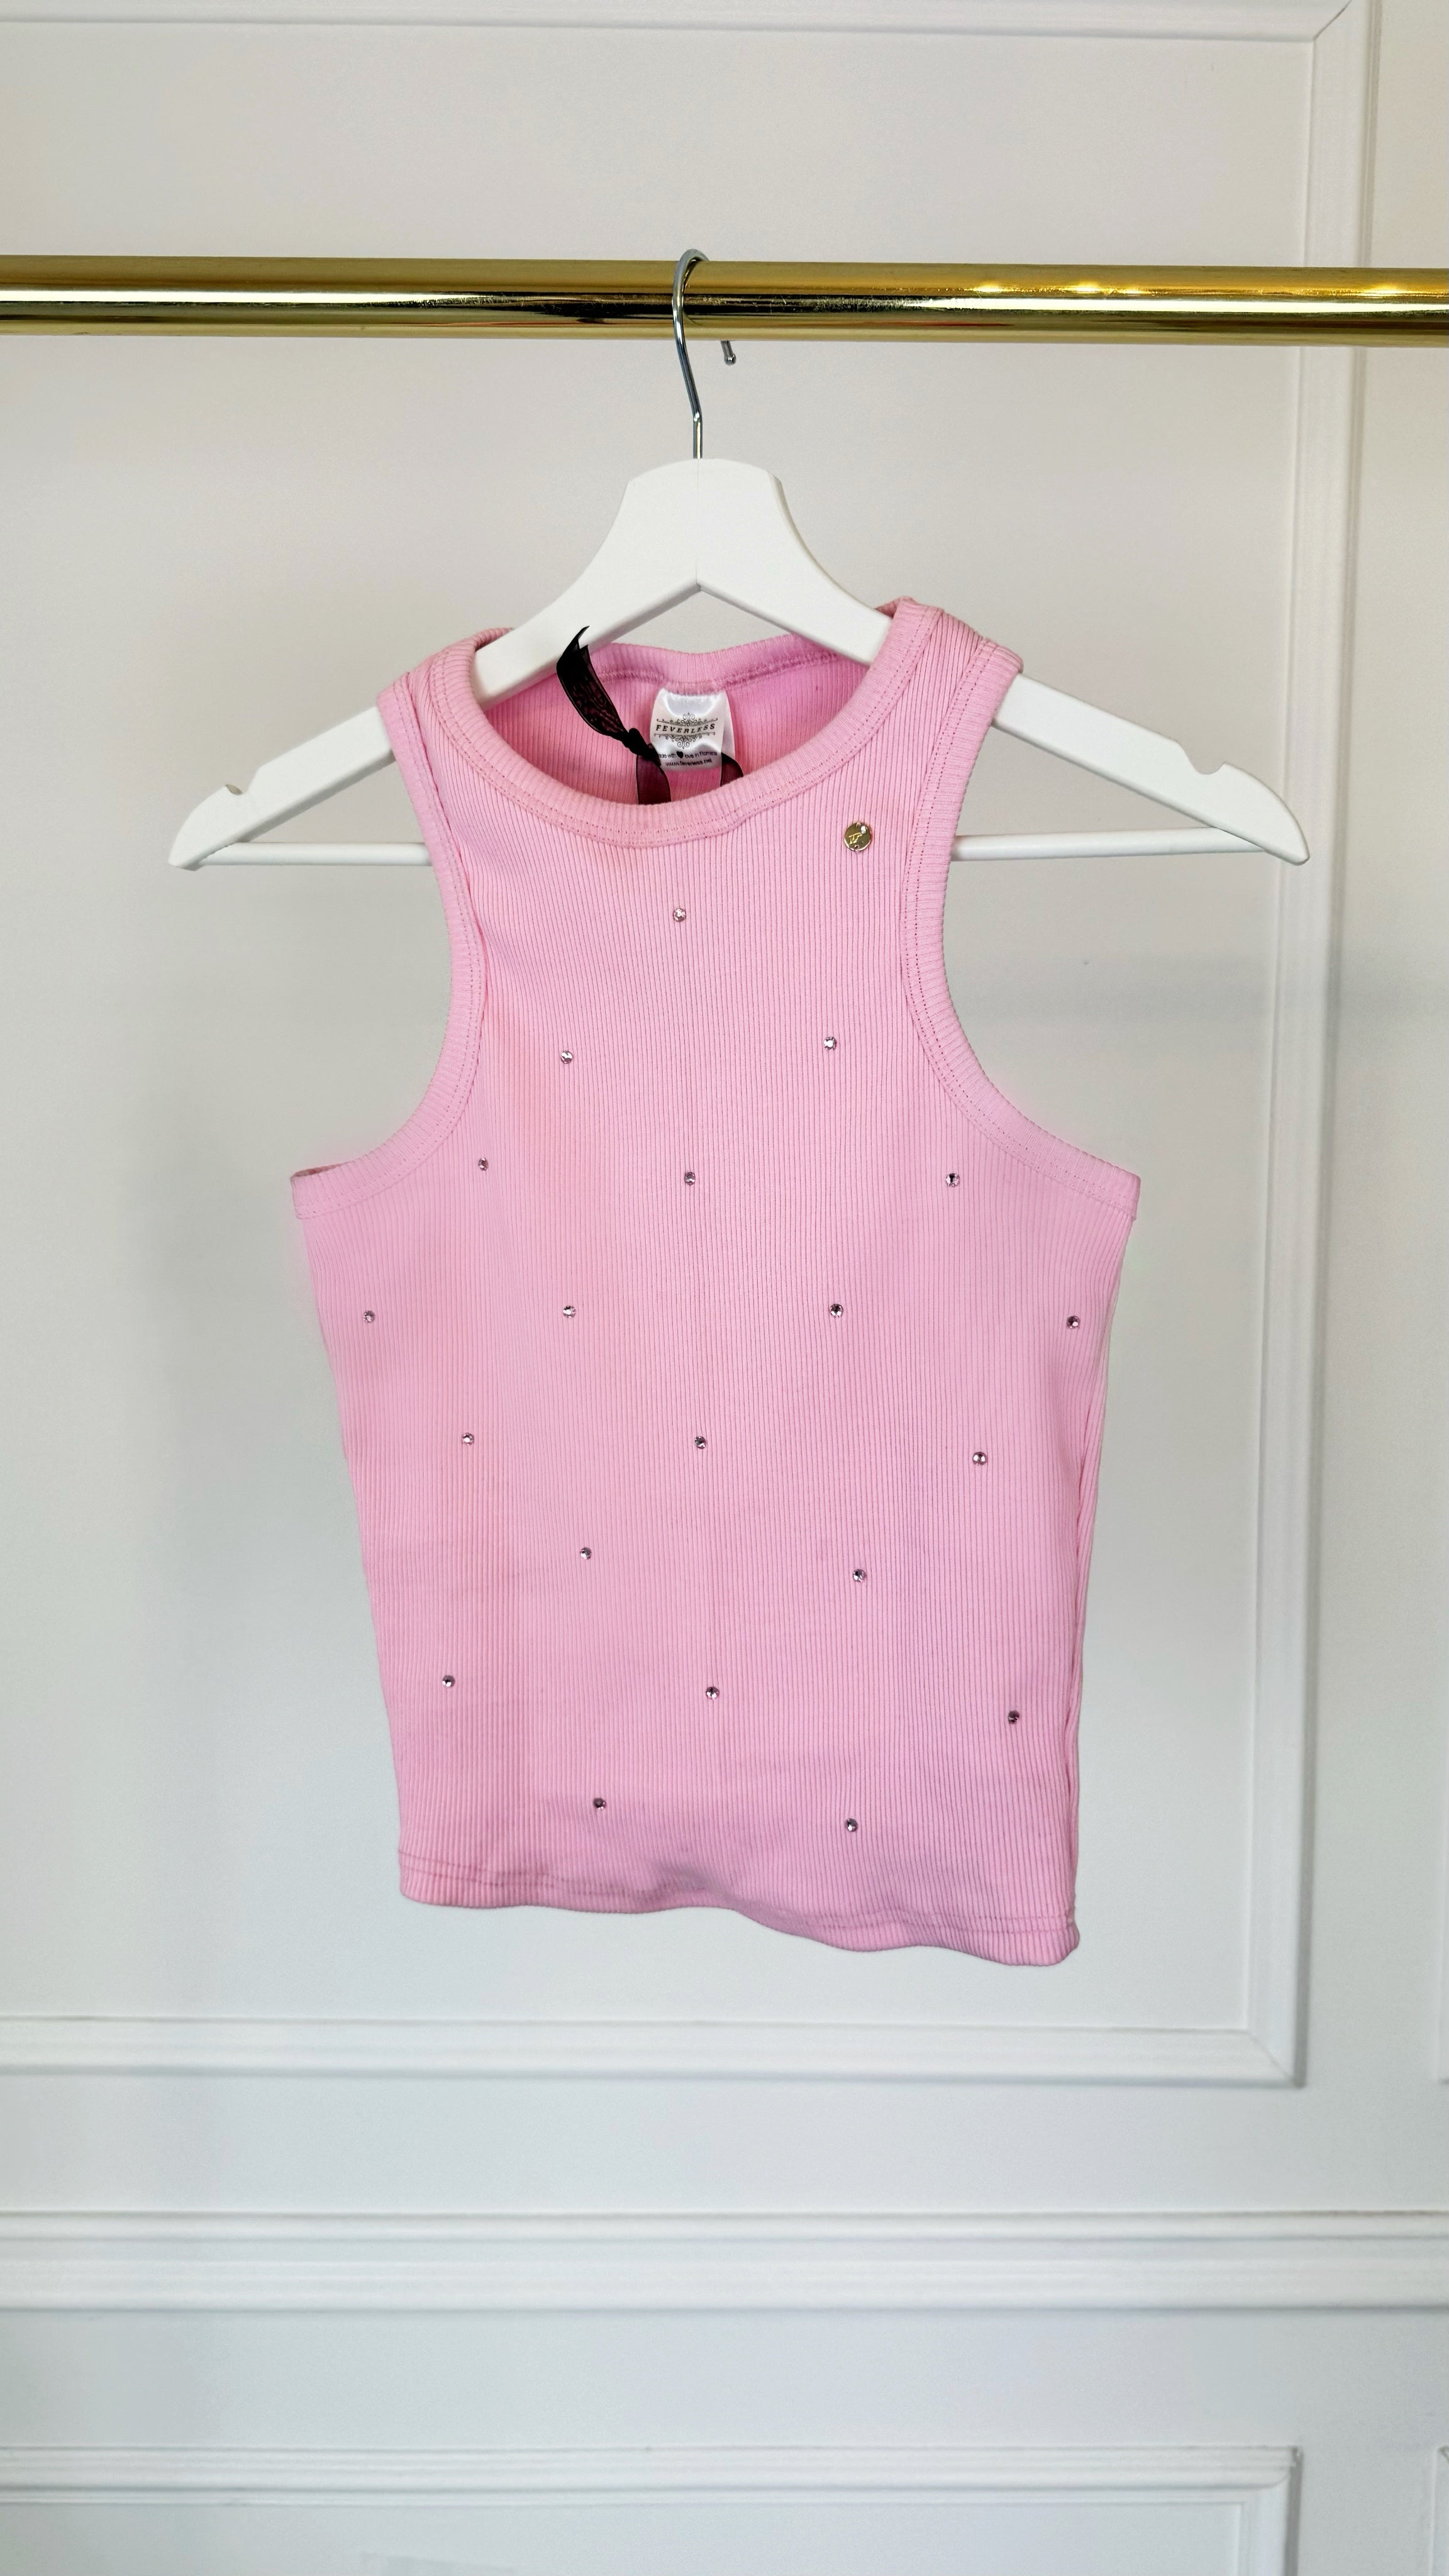 "Blush" Rib TOP with CRYSTALS - 4 Color Variations